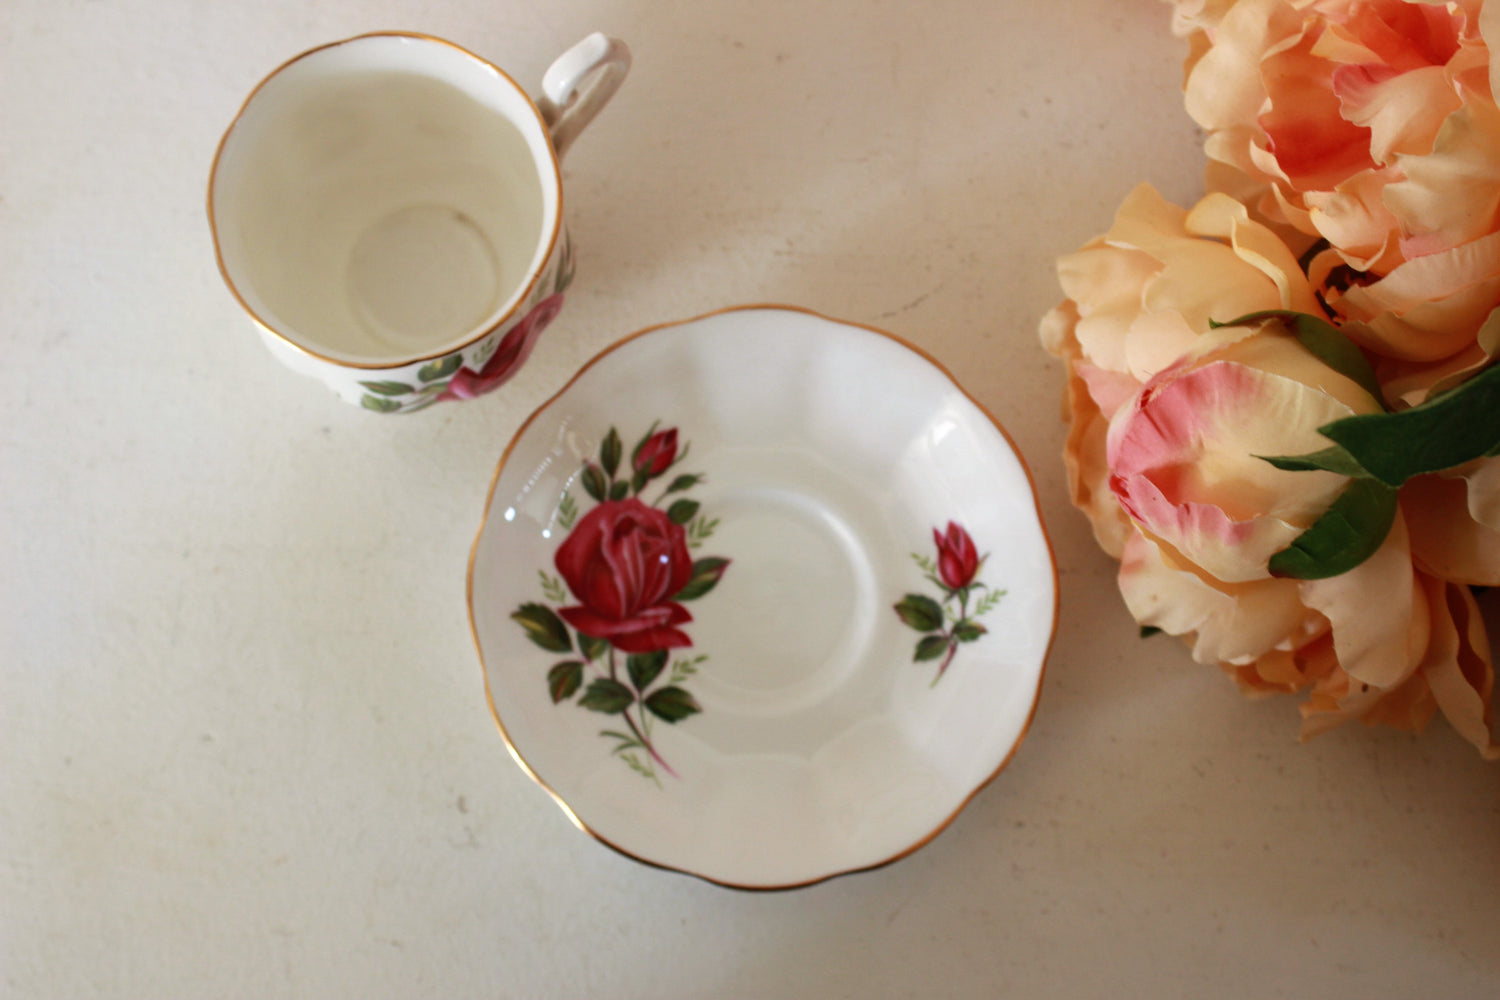 Vintage Royal Albert China Tea Cup and Saucer with Pink Roses